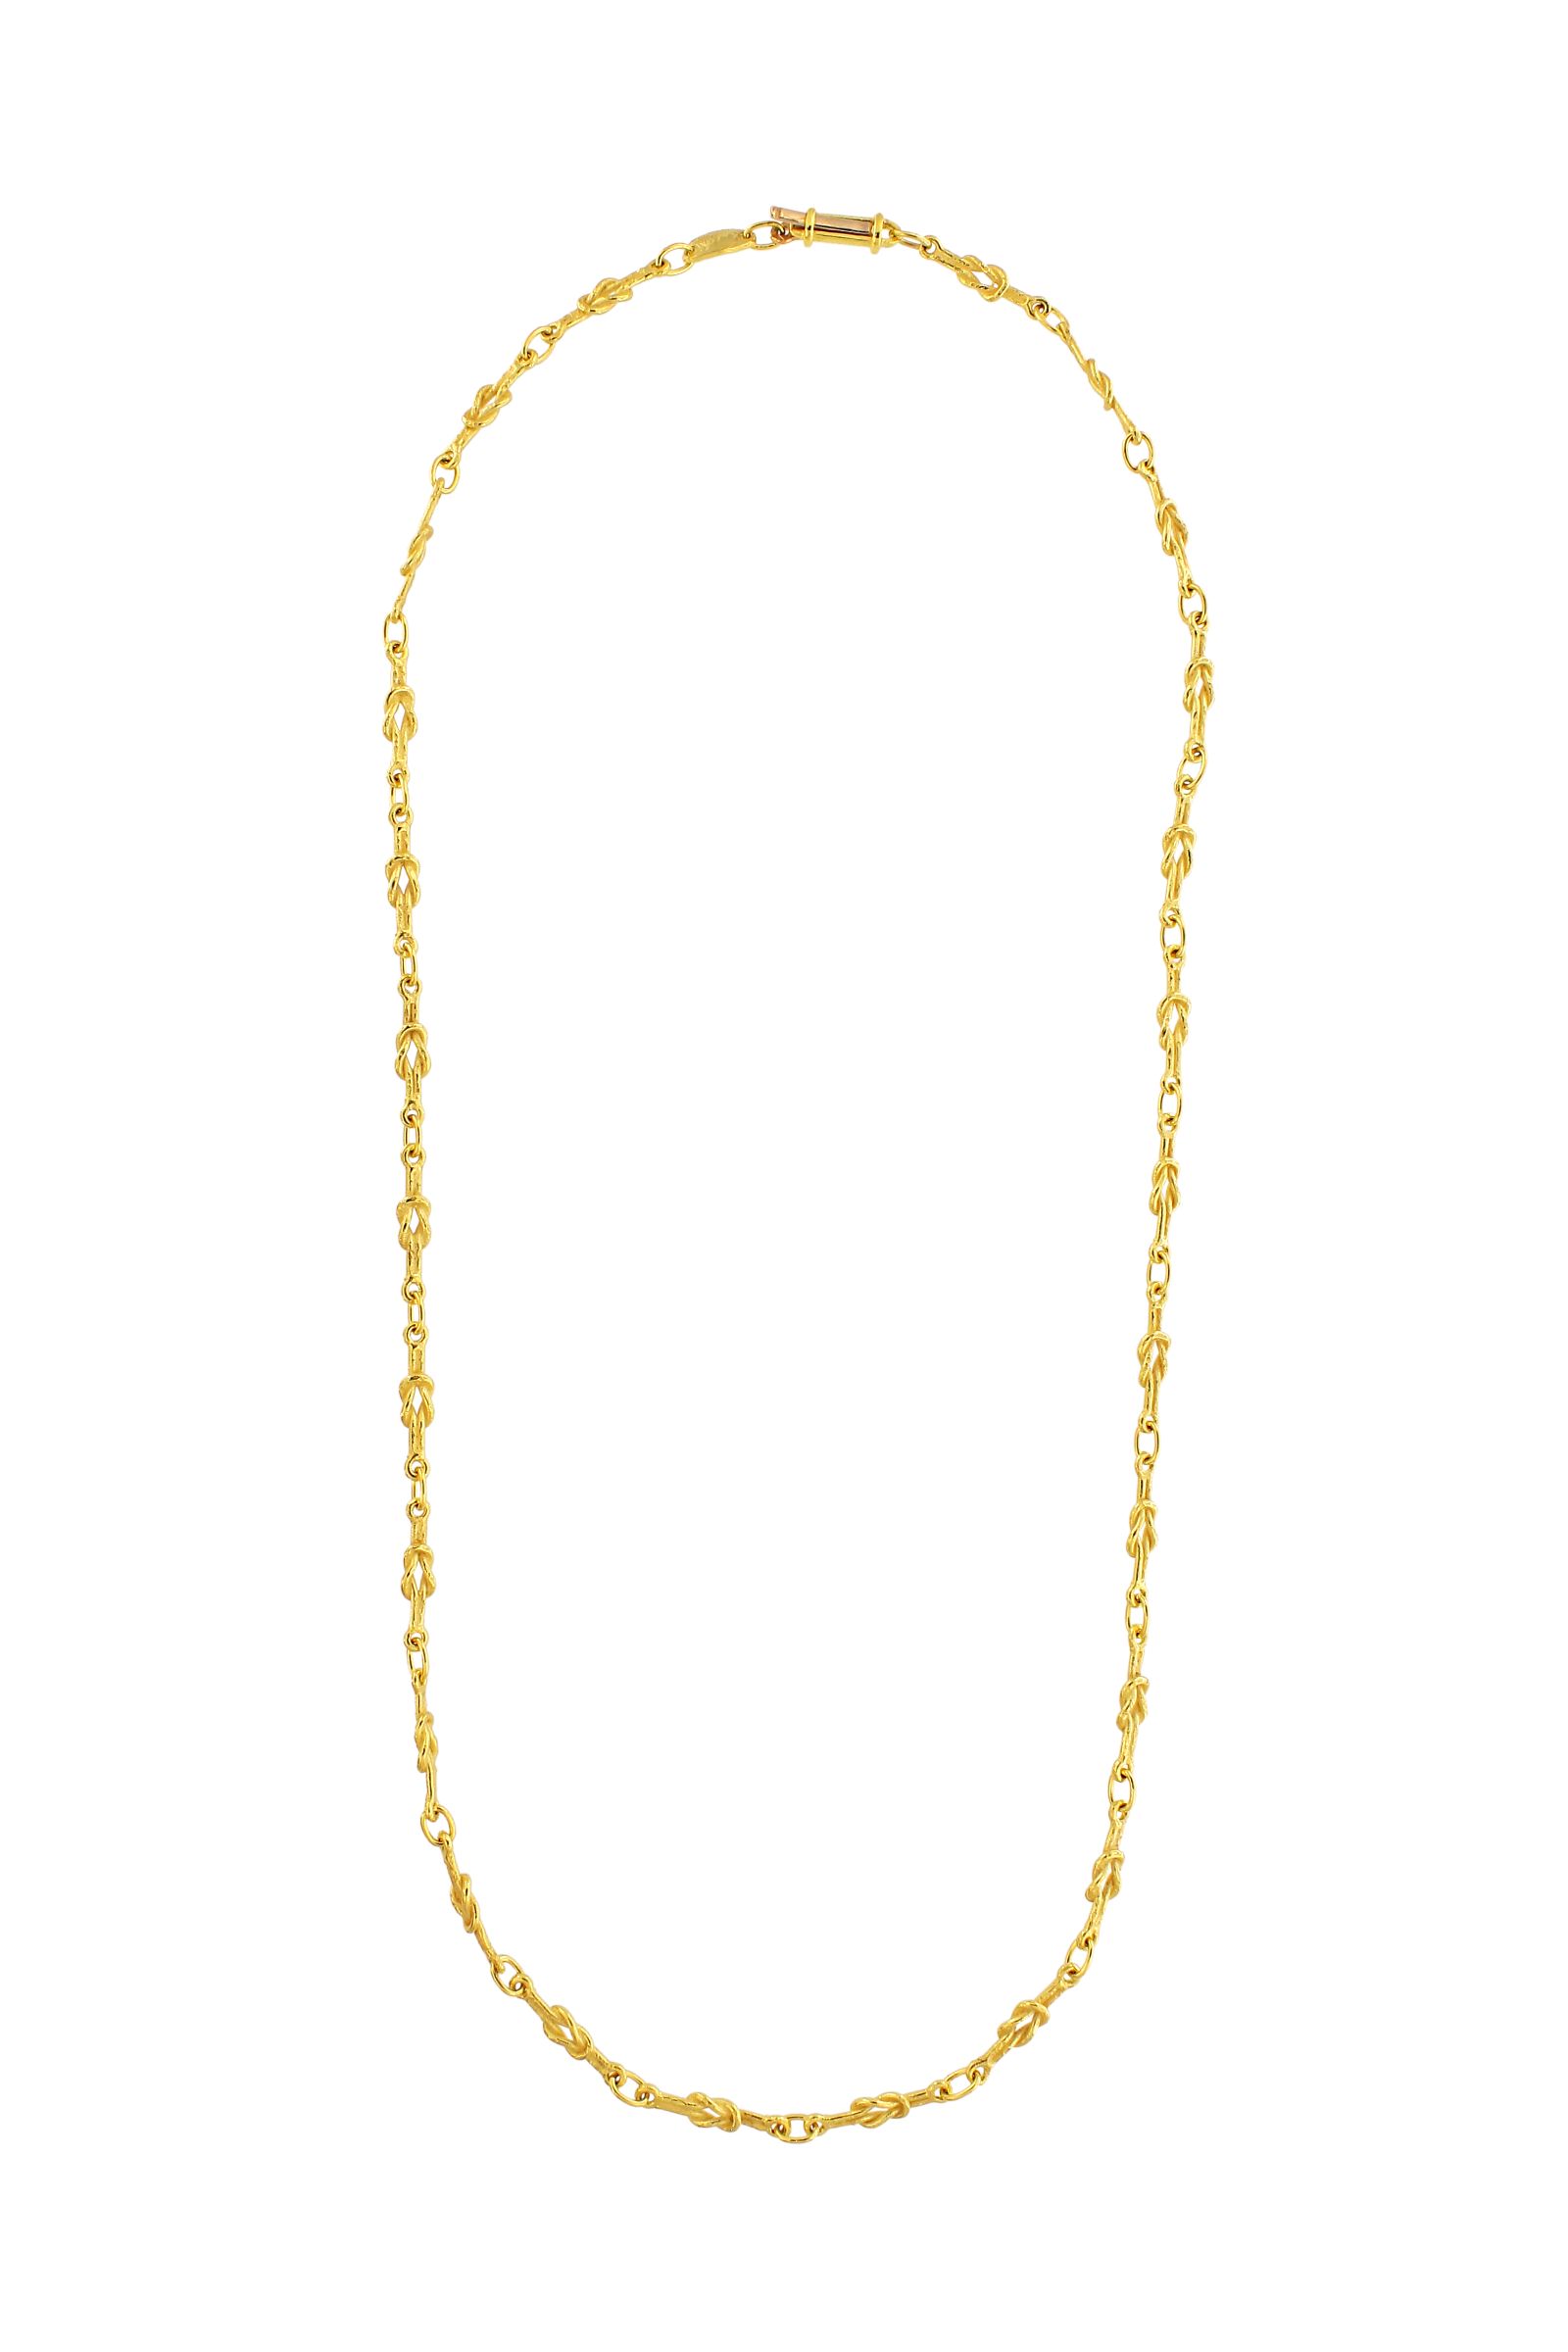 SA81D-18-Kt-Yellow-Gold-Chain-Necklace-1